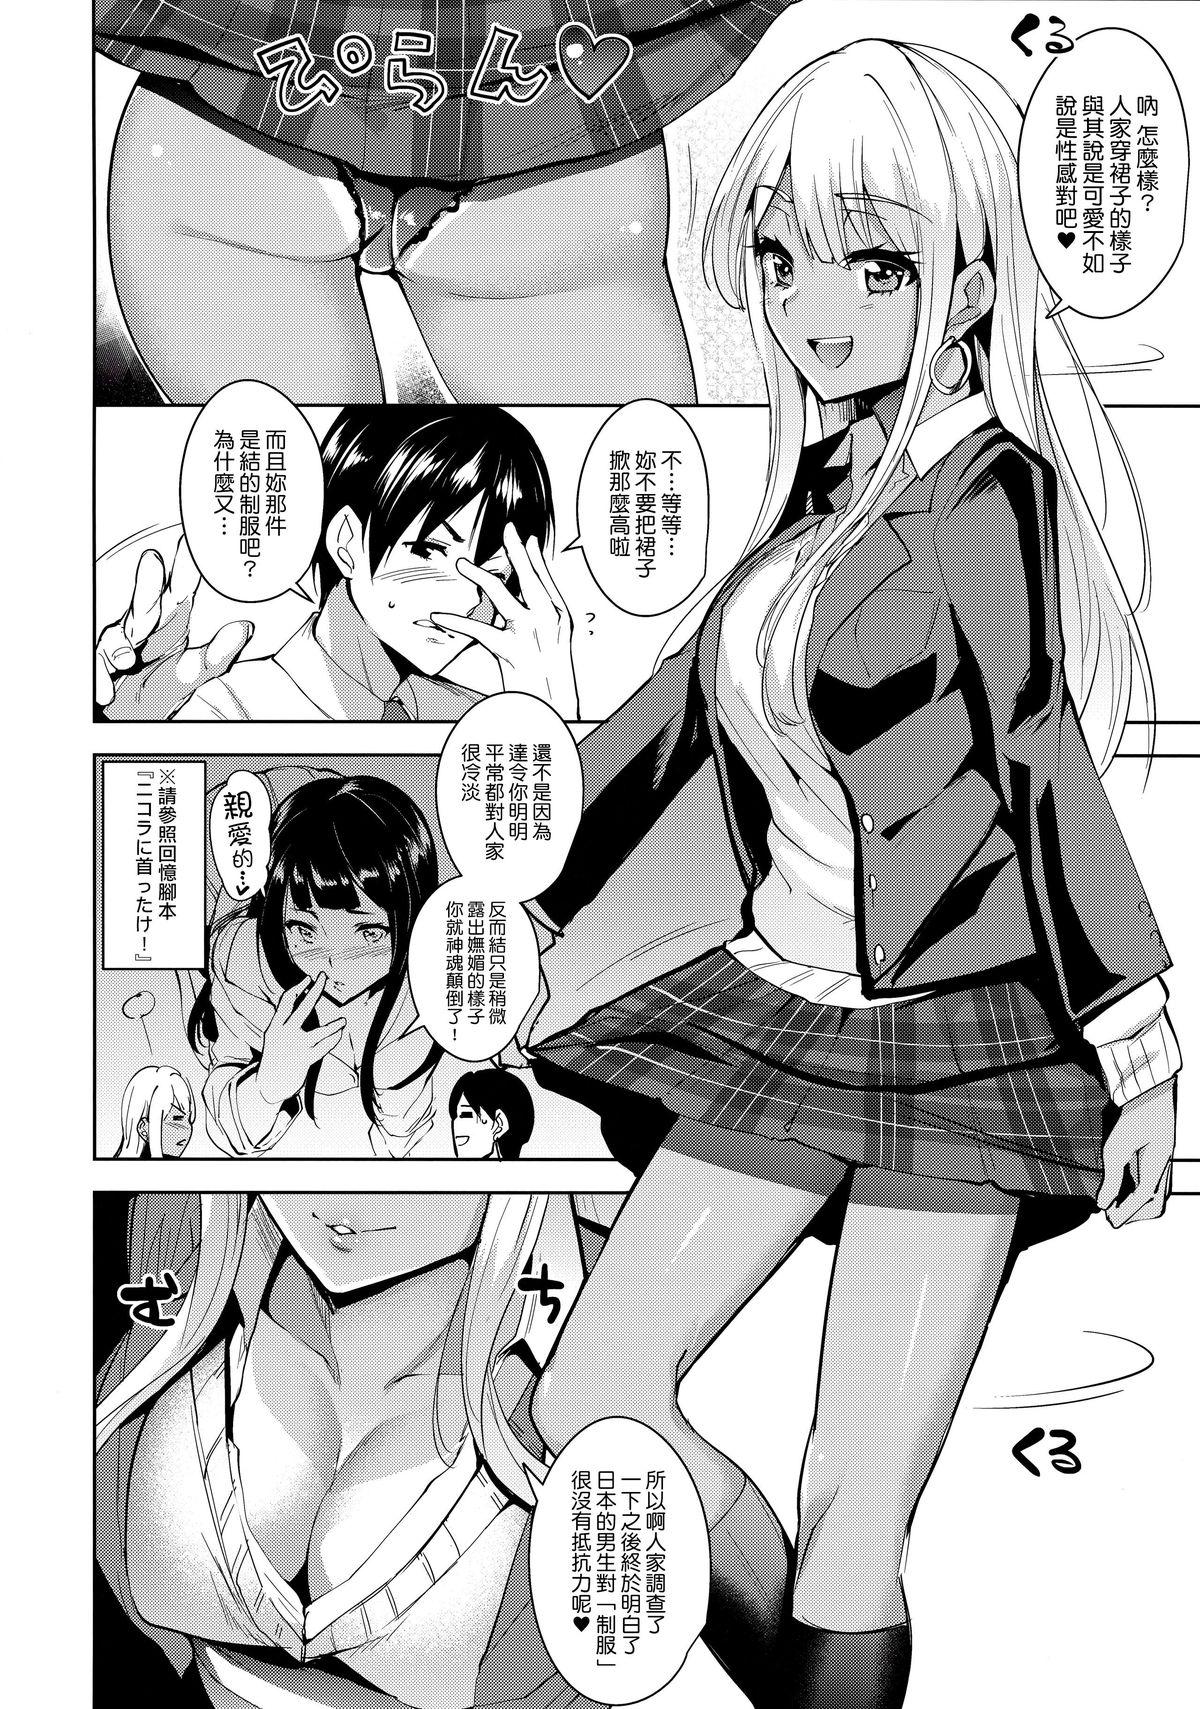 College 7SU2 - Tokyo 7th sisters Nice Tits - Page 6